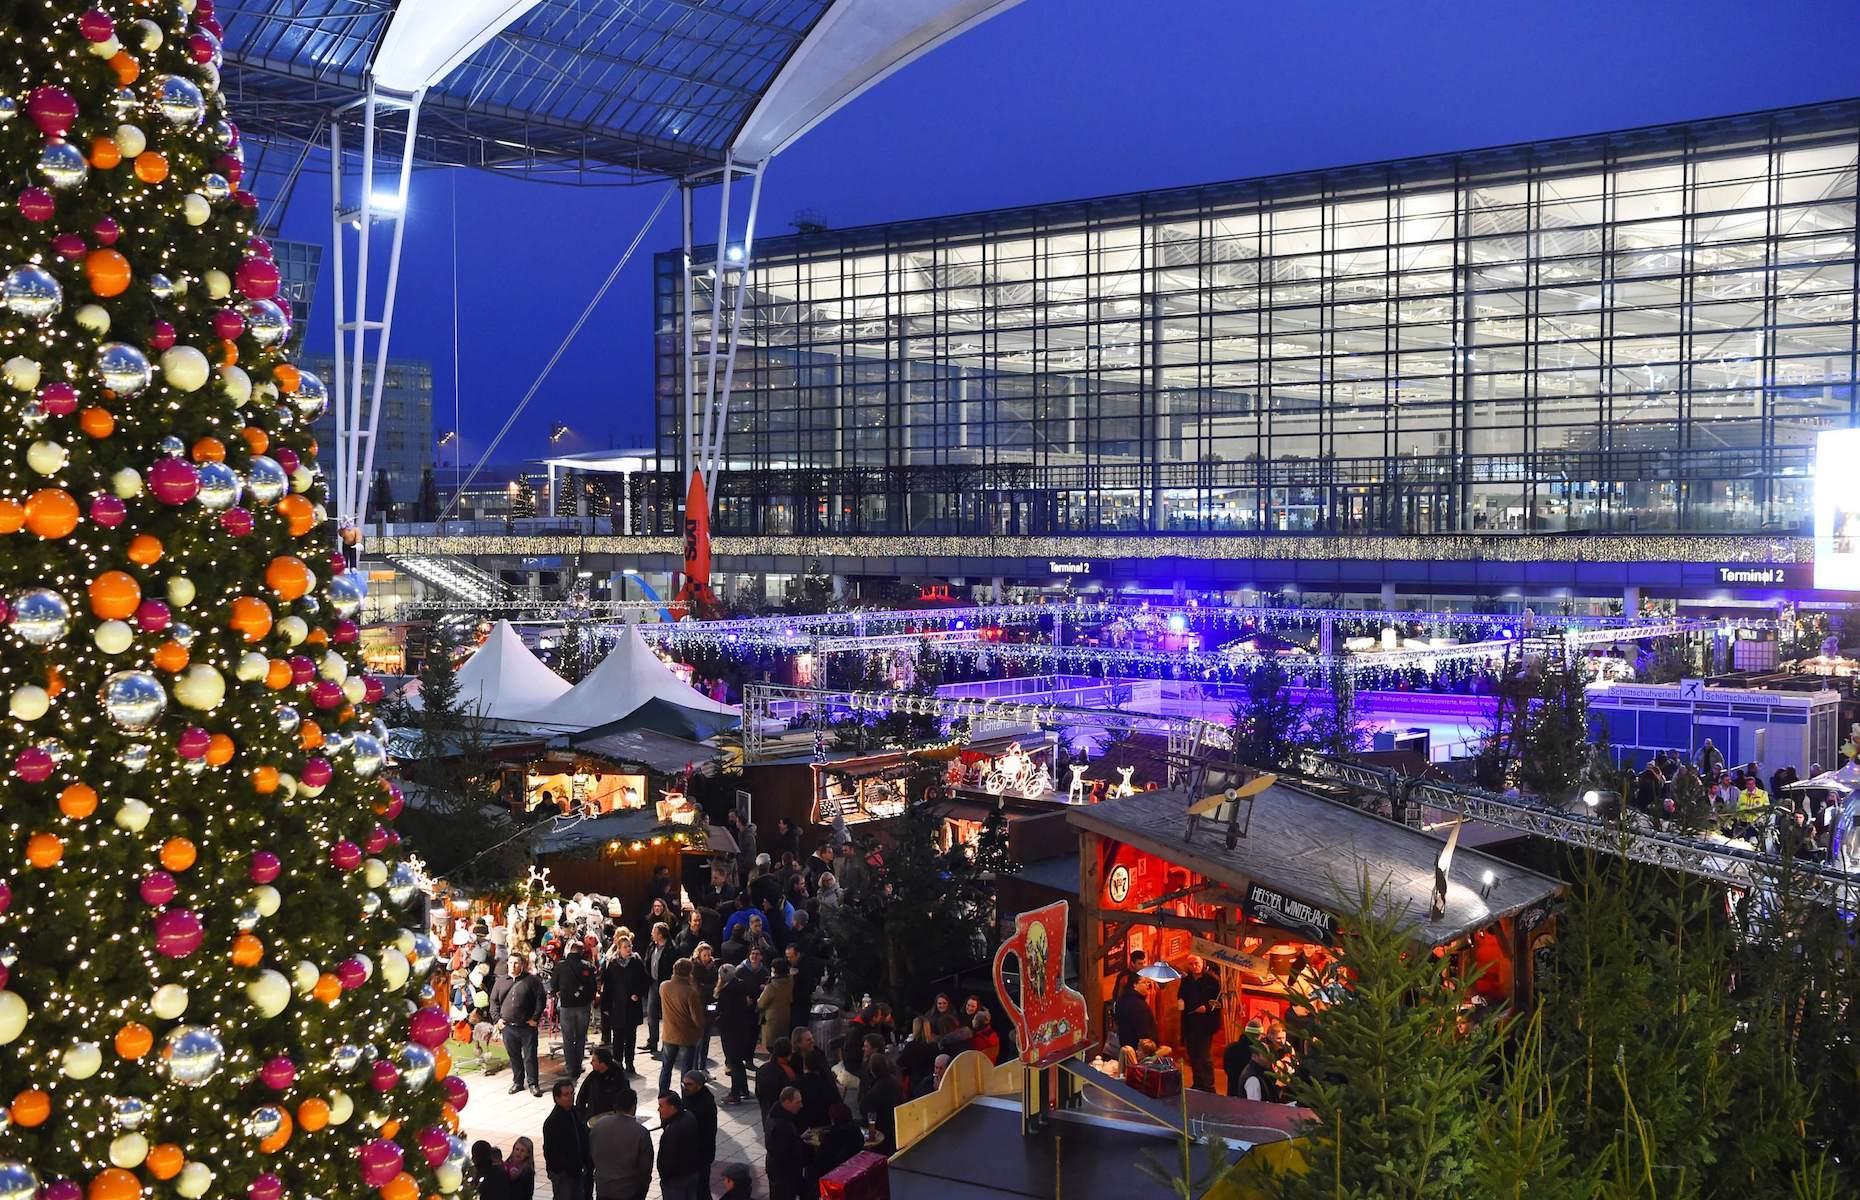 <p>You don't need to leave the confines of the airport to experience some Bavarian culture. The airport hosts its own Christmas market from mid-November and throughout December. Admire the towering Christmas tree, pick up some handmade gifts from the 50-odd stalls, sip a glühwein or take a spin on one of two ice rinks before boarding your plane.</p>  <p><strong><a href="https://www.loveexploring.com/galleries/72145/what-the-top-airports-in-the-world-used-to-look-like">Now discover what the top airports in the world used to look like</a></strong></p>